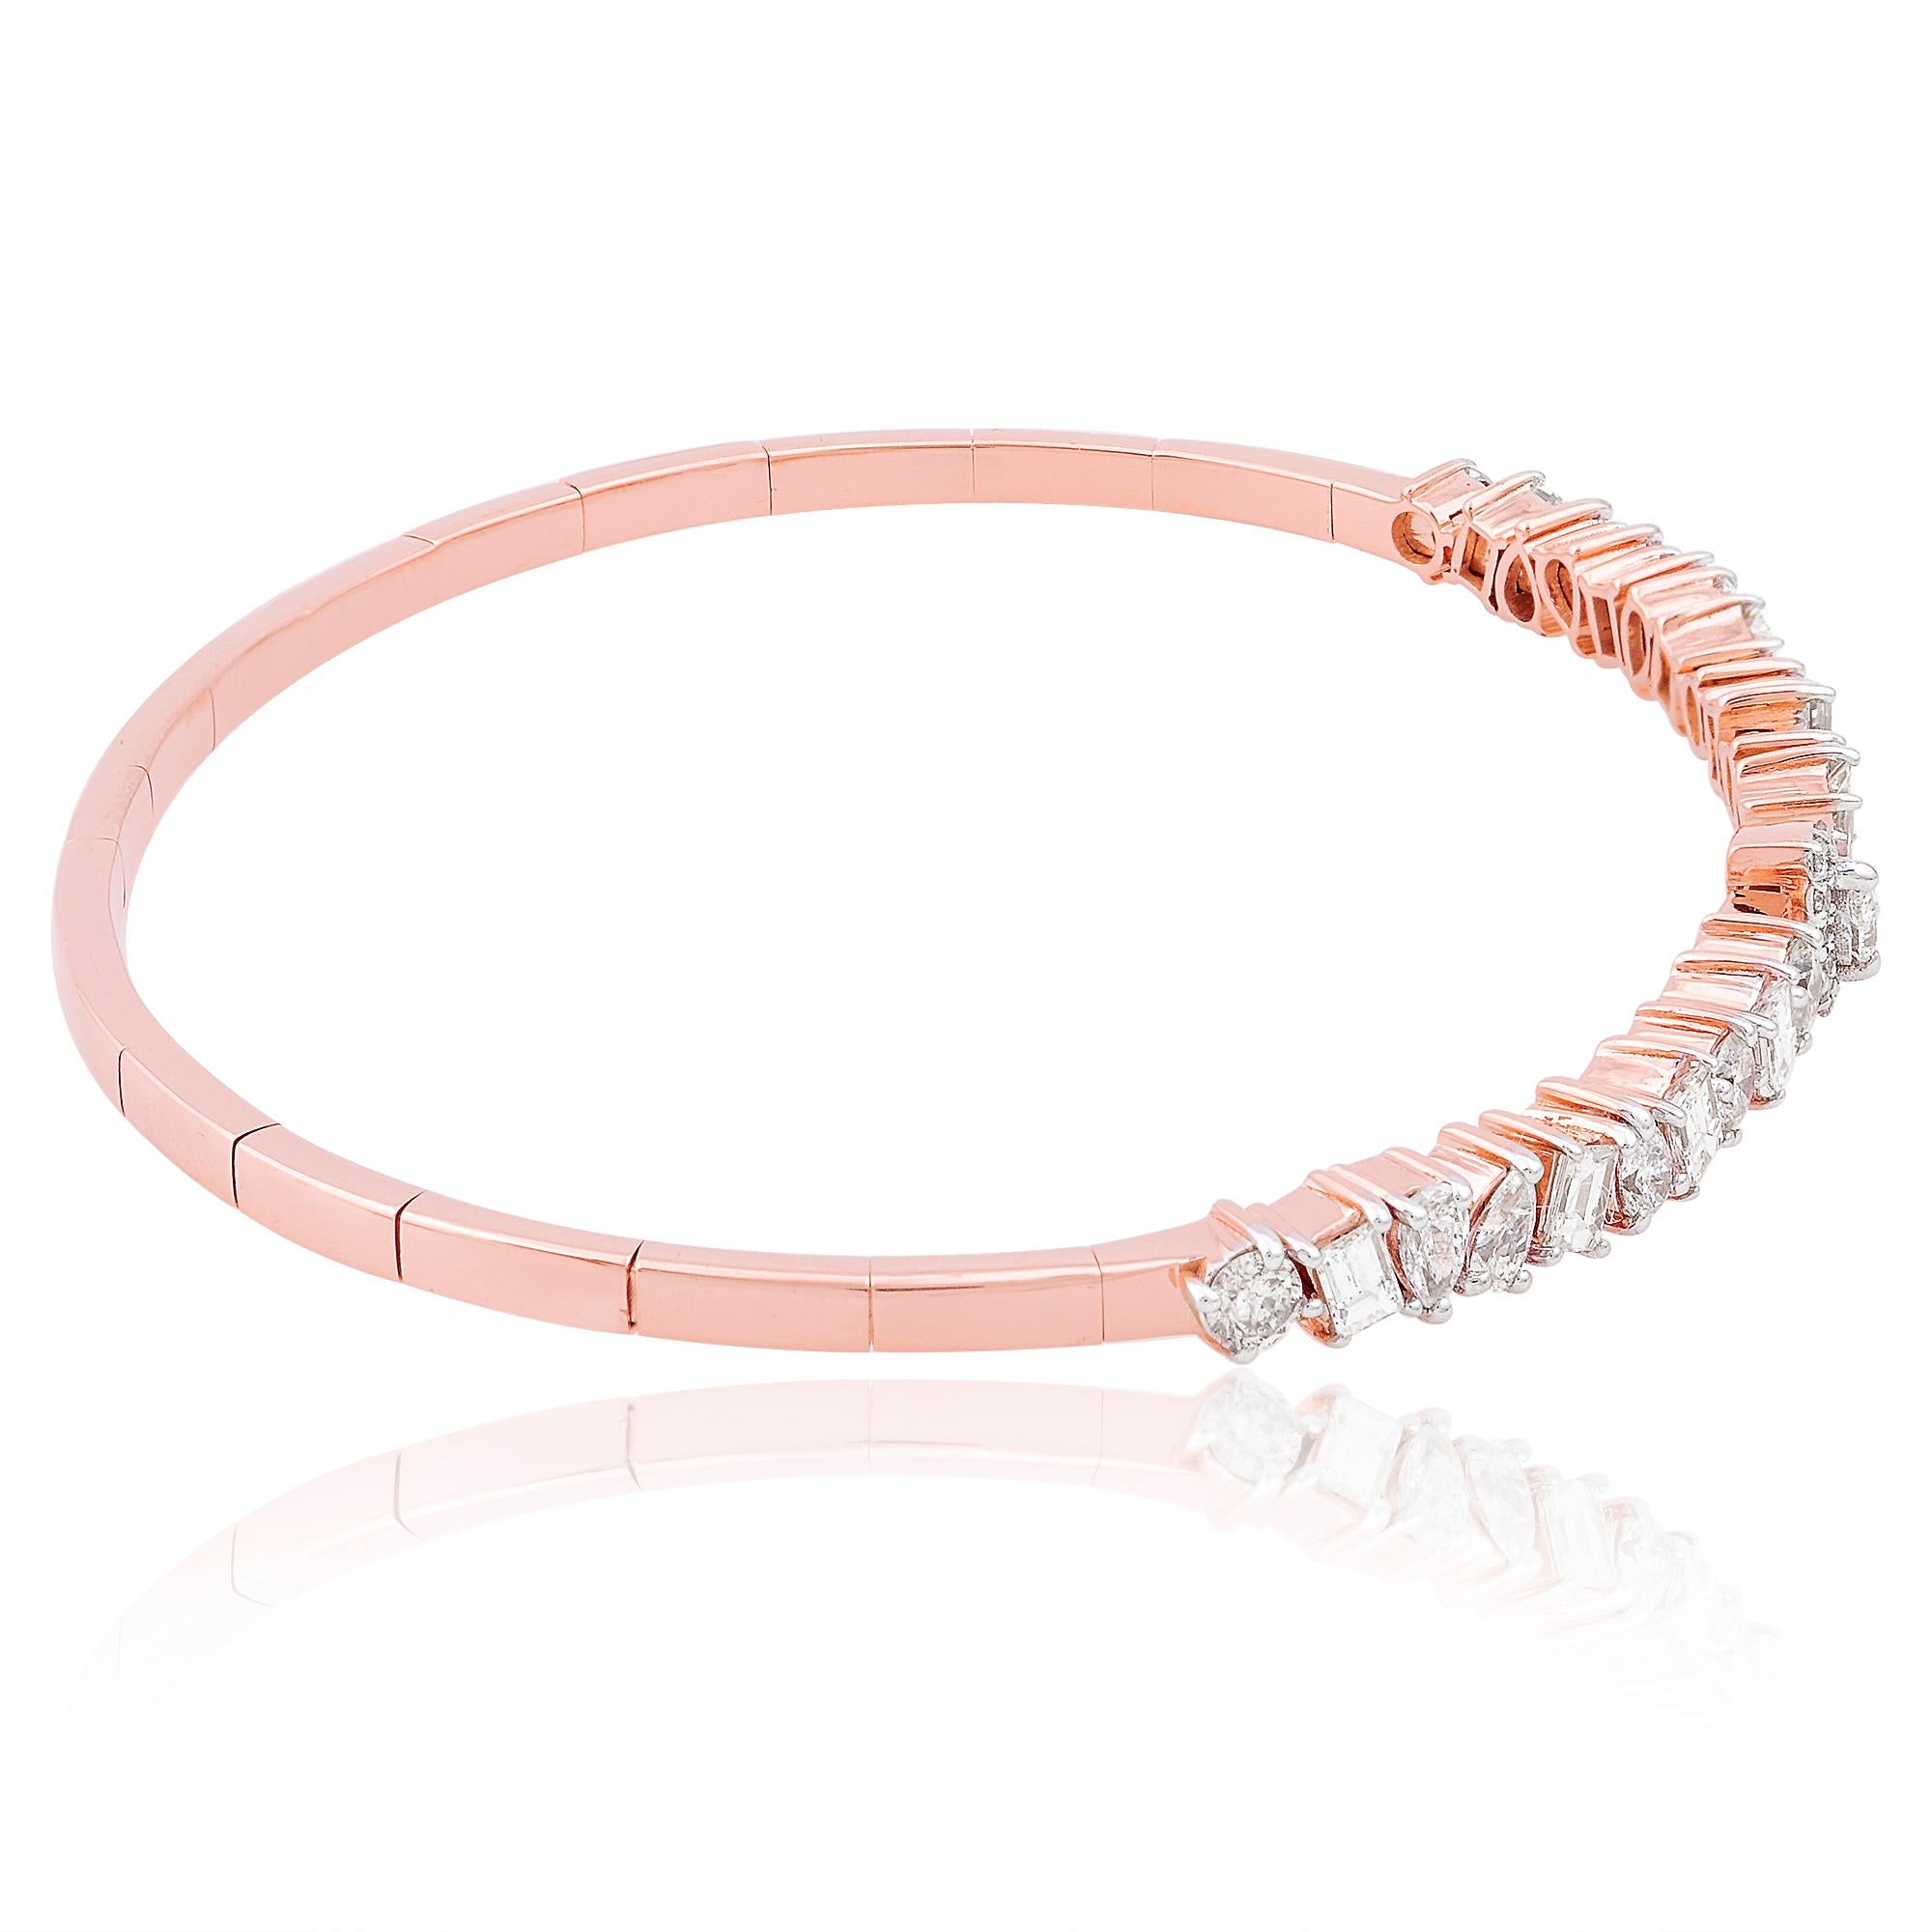 Indulge in the timeless allure of luxury with this exquisite 1.62 carat diamond cuff bangle bracelet, crafted meticulously in 18 karat rose gold. Handmade with unparalleled attention to detail, this breathtaking piece of jewelry embodies elegance